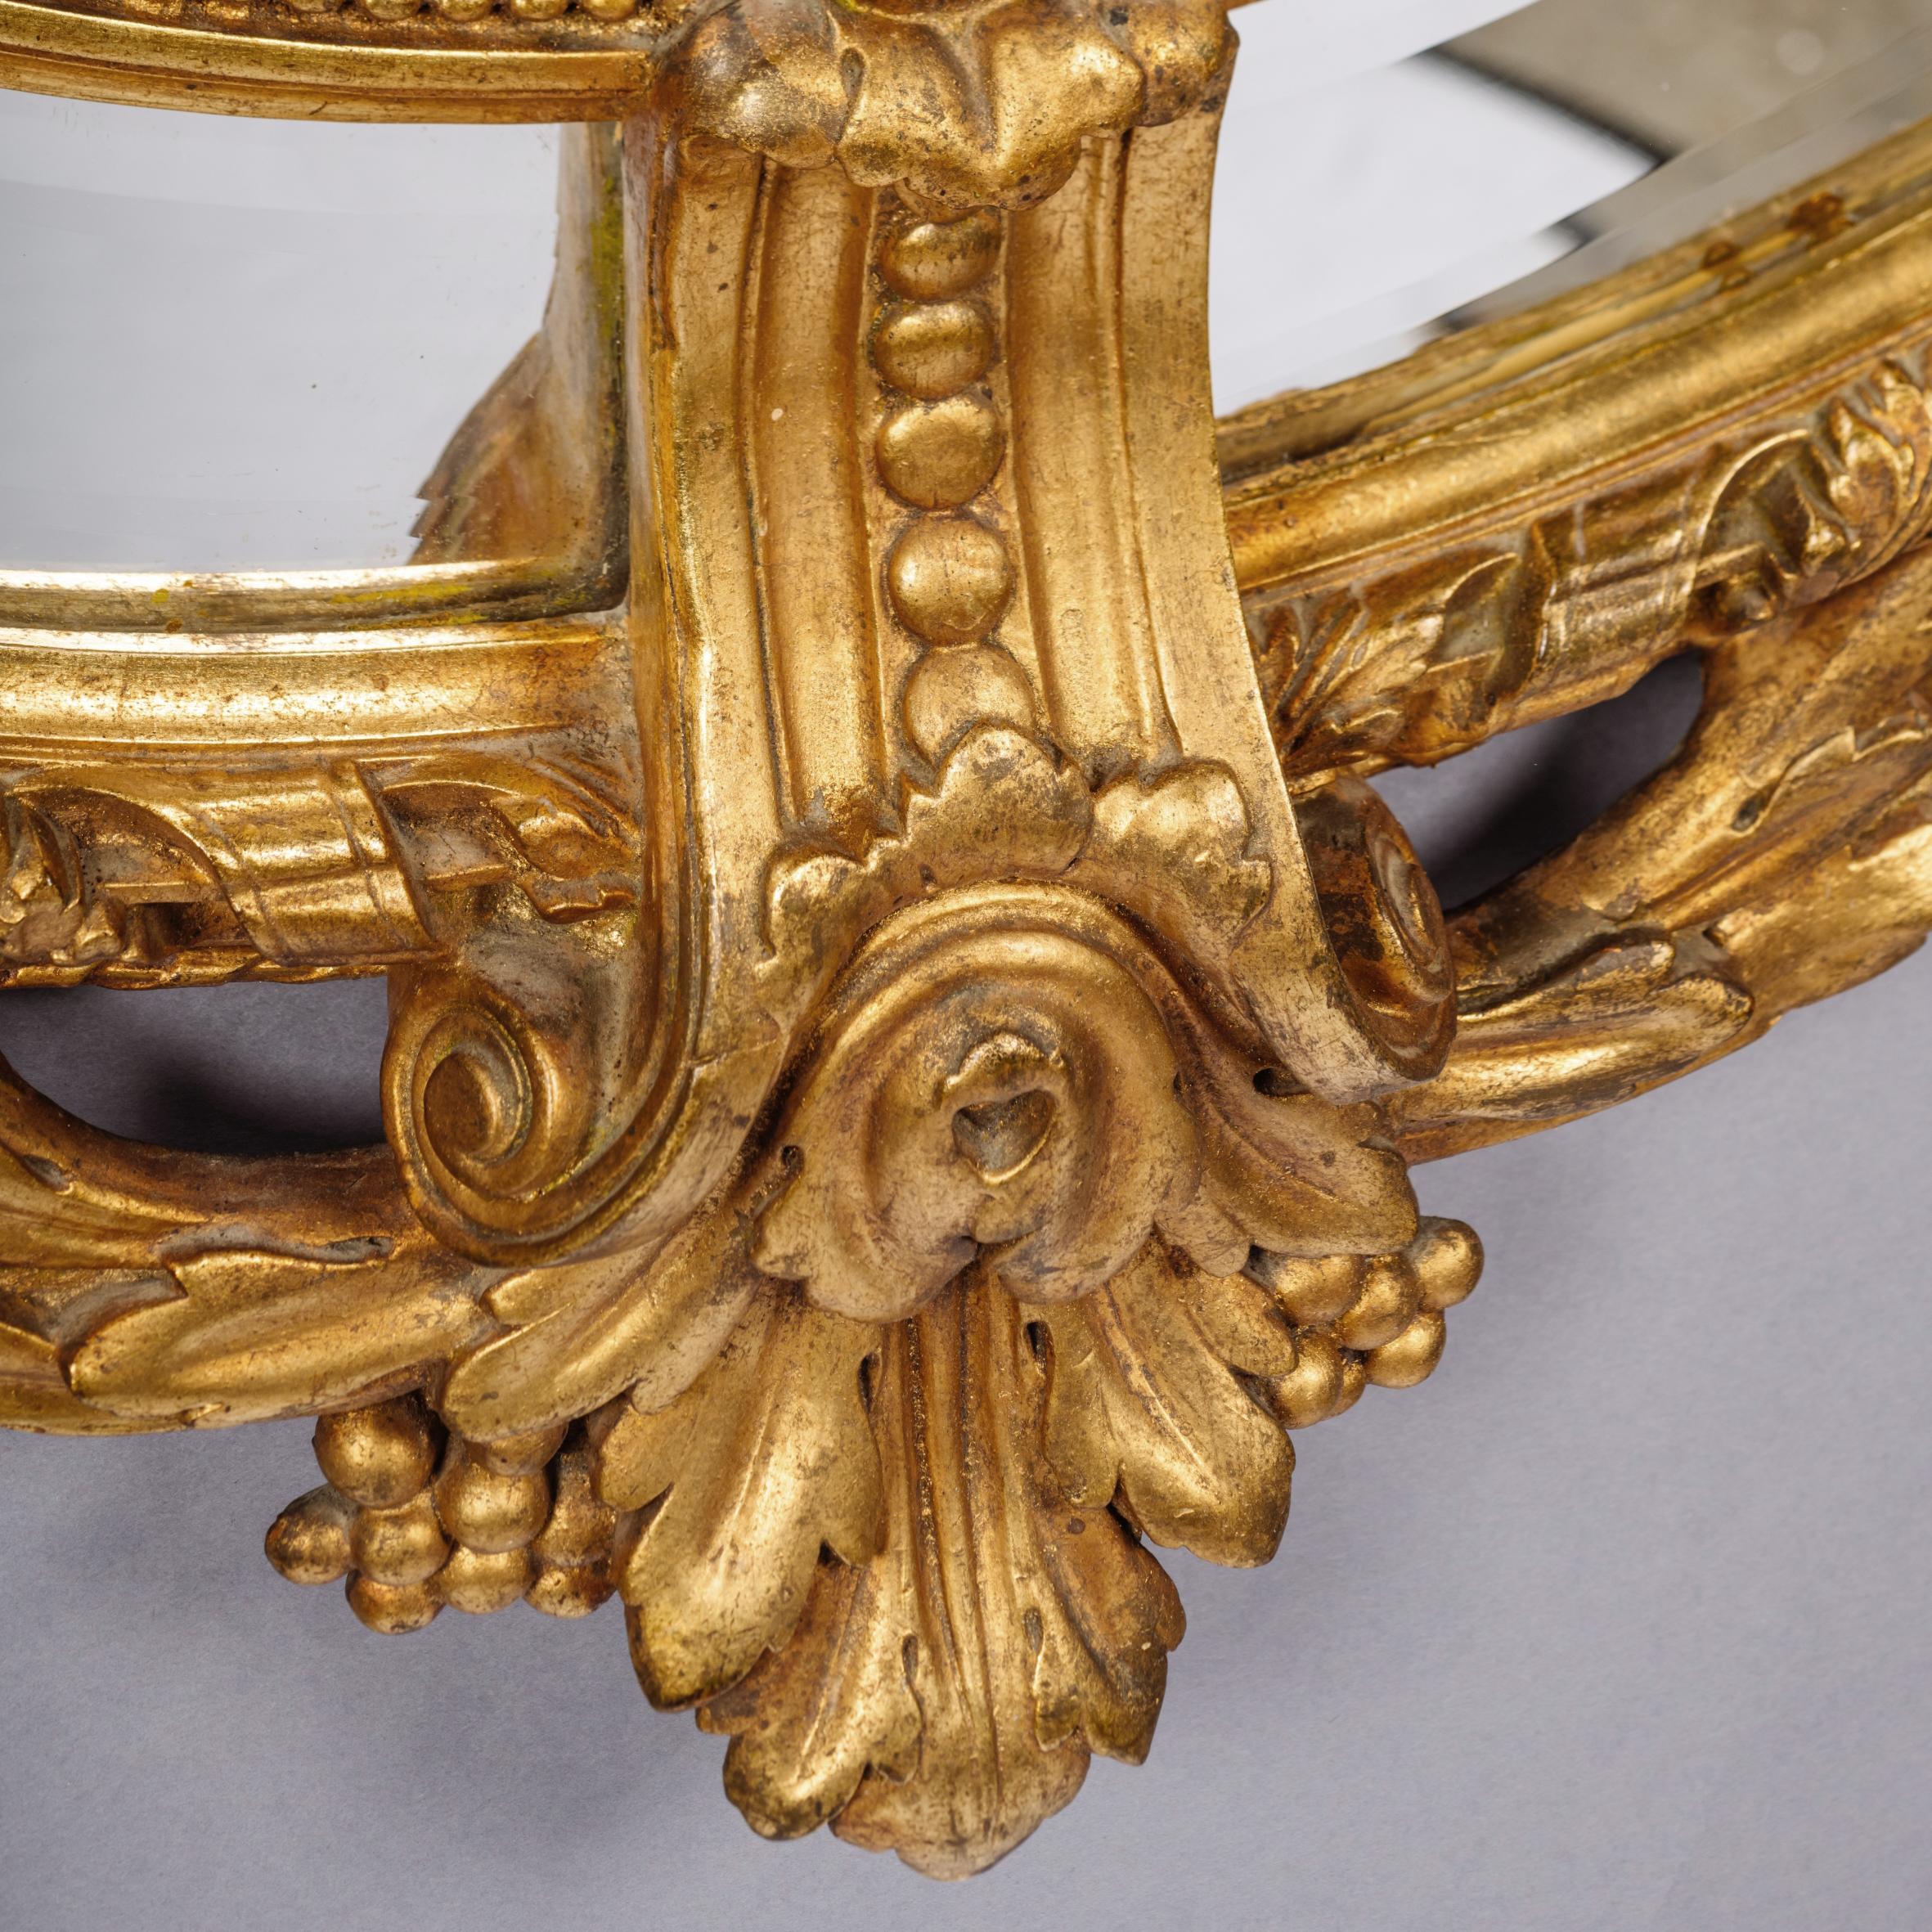 A fine Napoleon III Carved giltwood oval Marginal frame mirror.

This finely carved giltwood and gesso mirror has an oval bevelled mirror plate, marginal borders and an exuberant acanthus and foliate cresting centred by a basket issuing flowers.